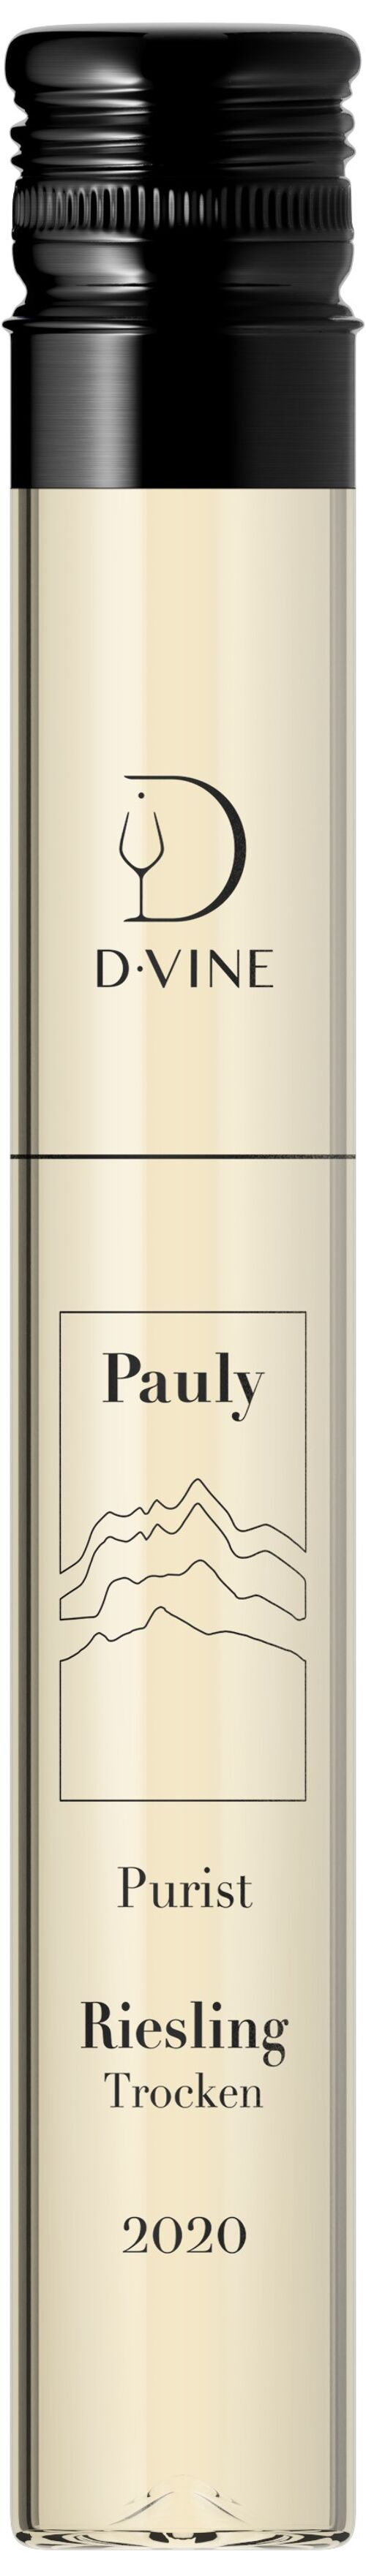 Vin Blanc - Allemagne Mosel Riesling Trocken Cuvée Purist Domaine Axel Pauly 2020